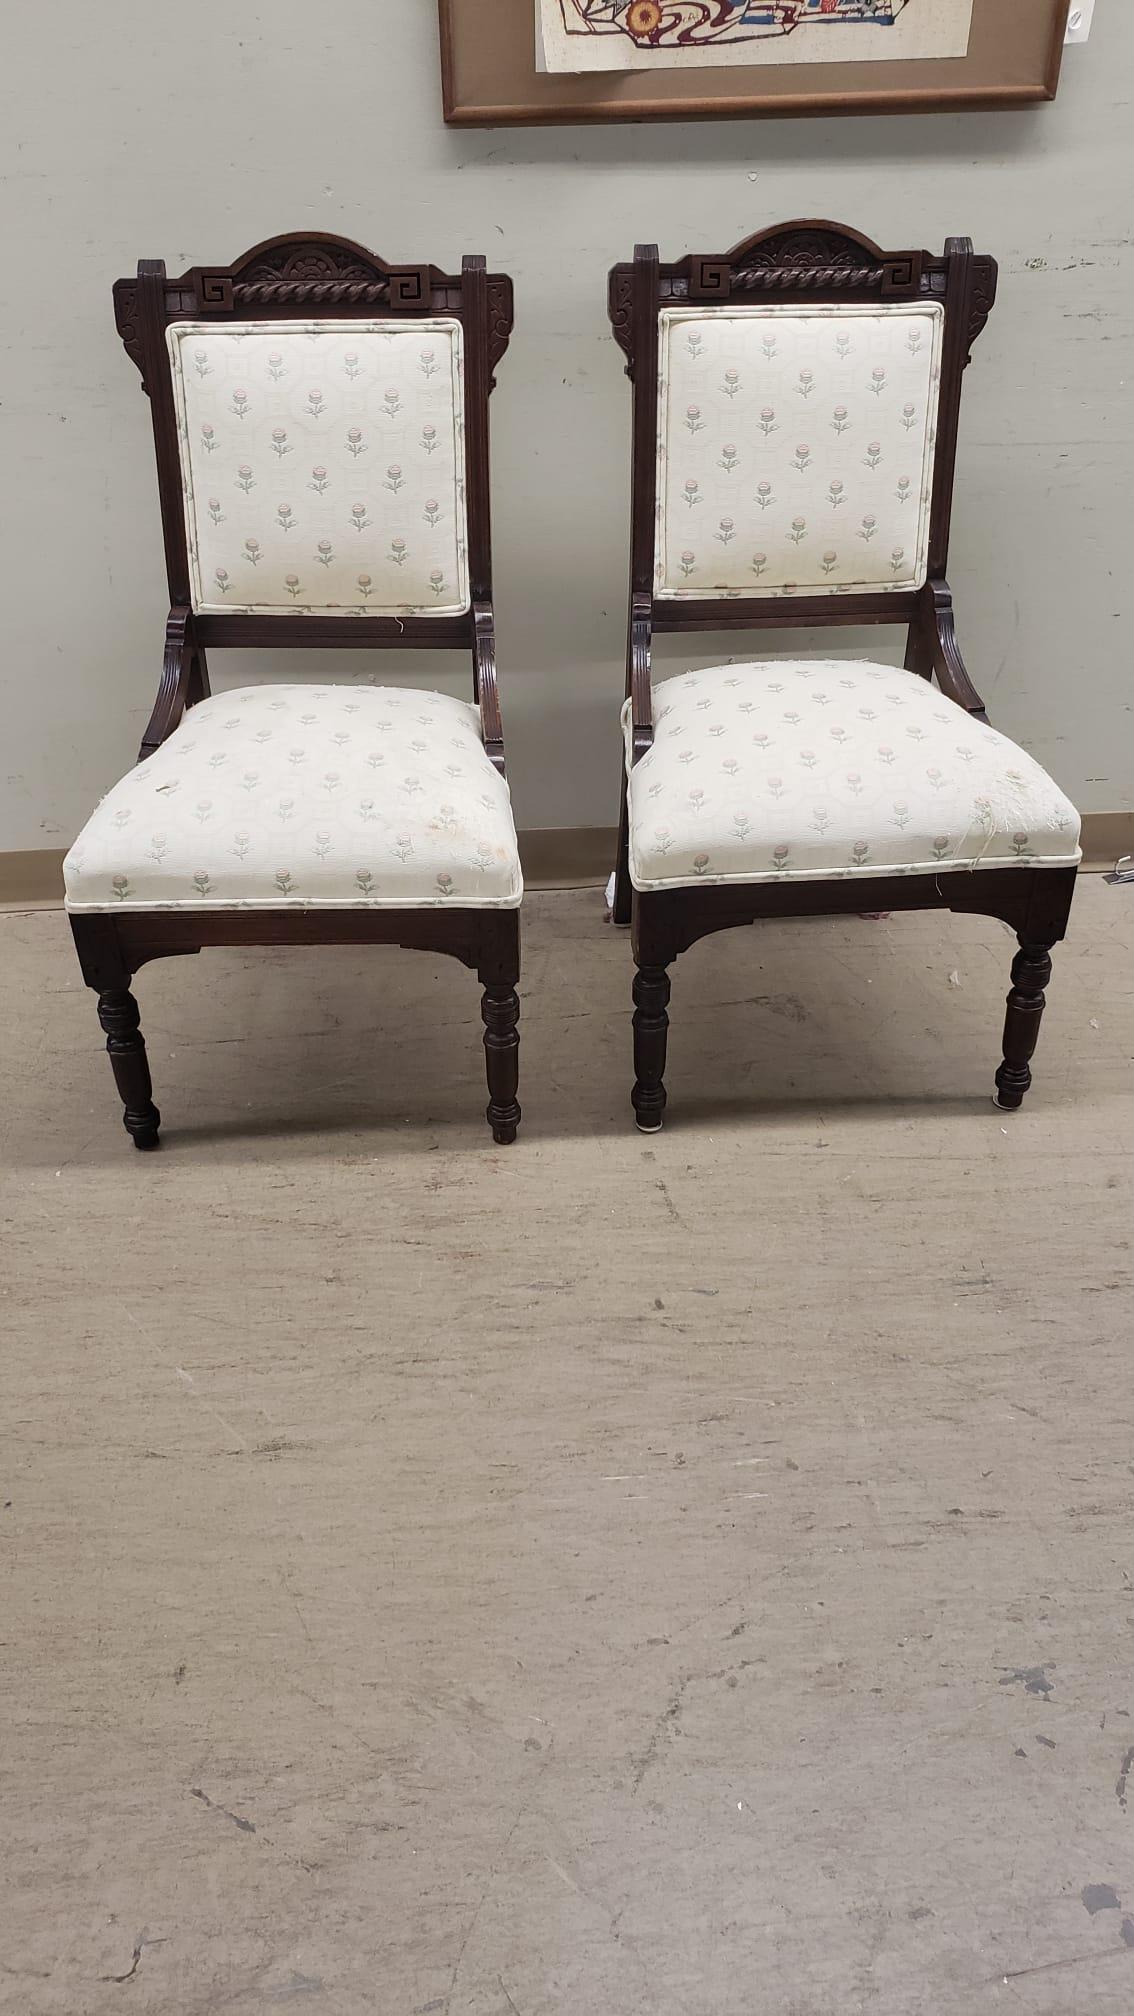 A pair of Victorian Carved walnut and Upholstered Side chairs in good antique condition. Measures 19